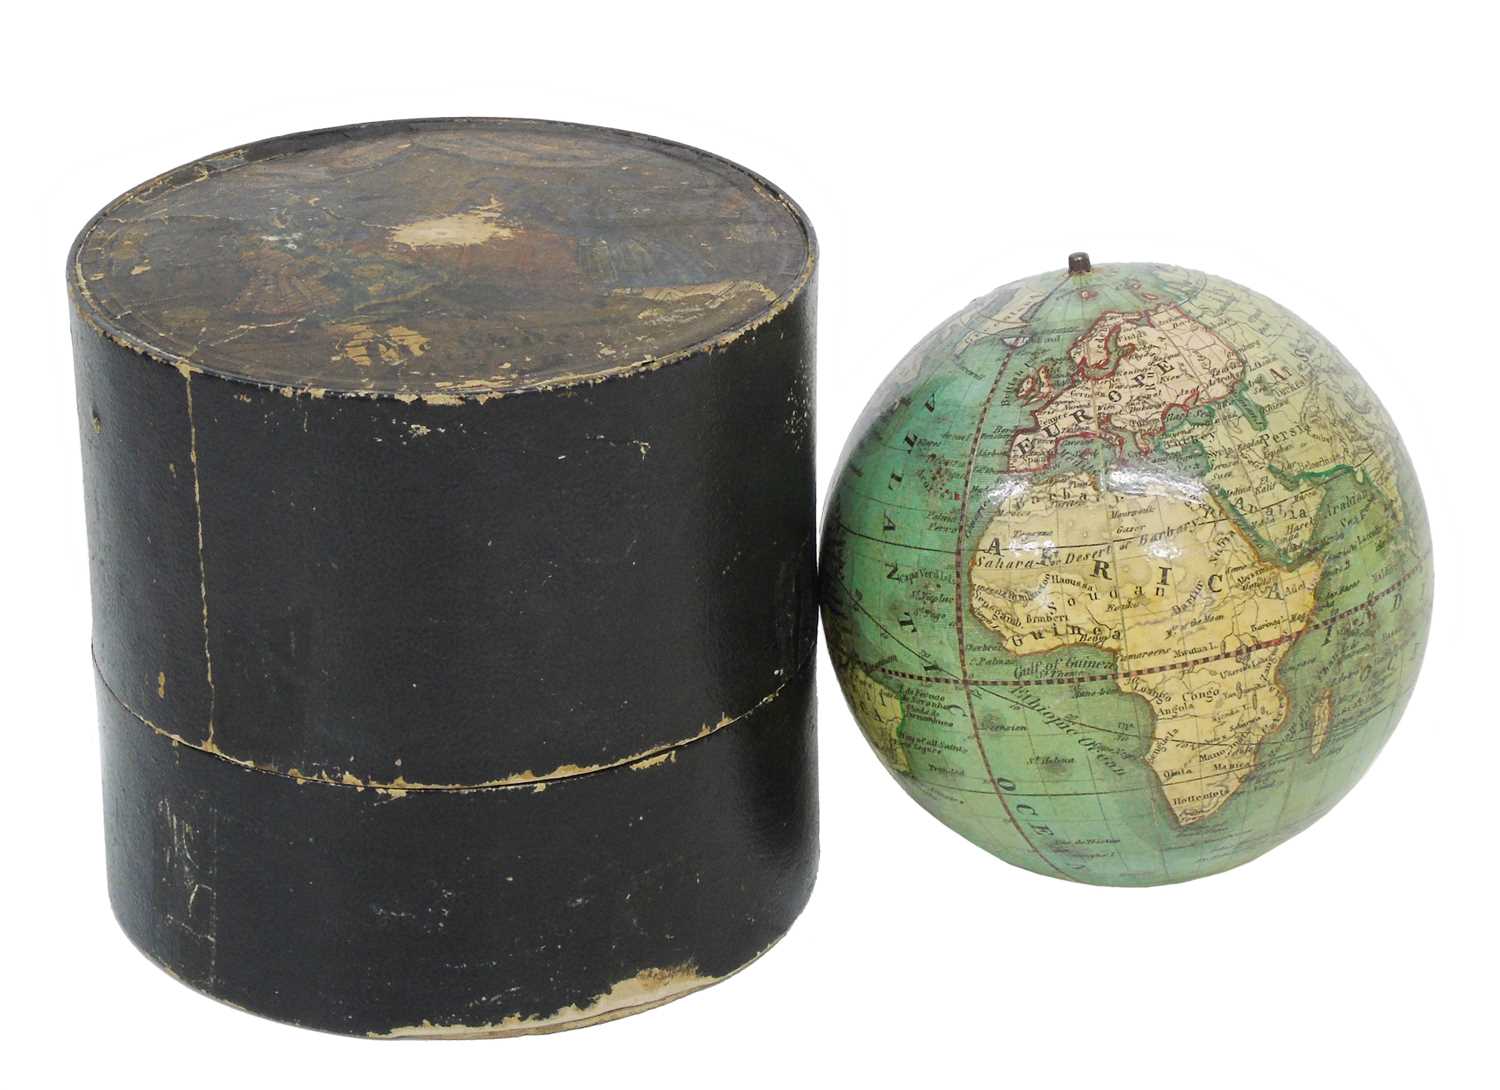 Lot 207 - Miniature globe. diameter 4", titled"The Earth" Published by C Able-Klinger in Nuremberg with original card box with picture panel top